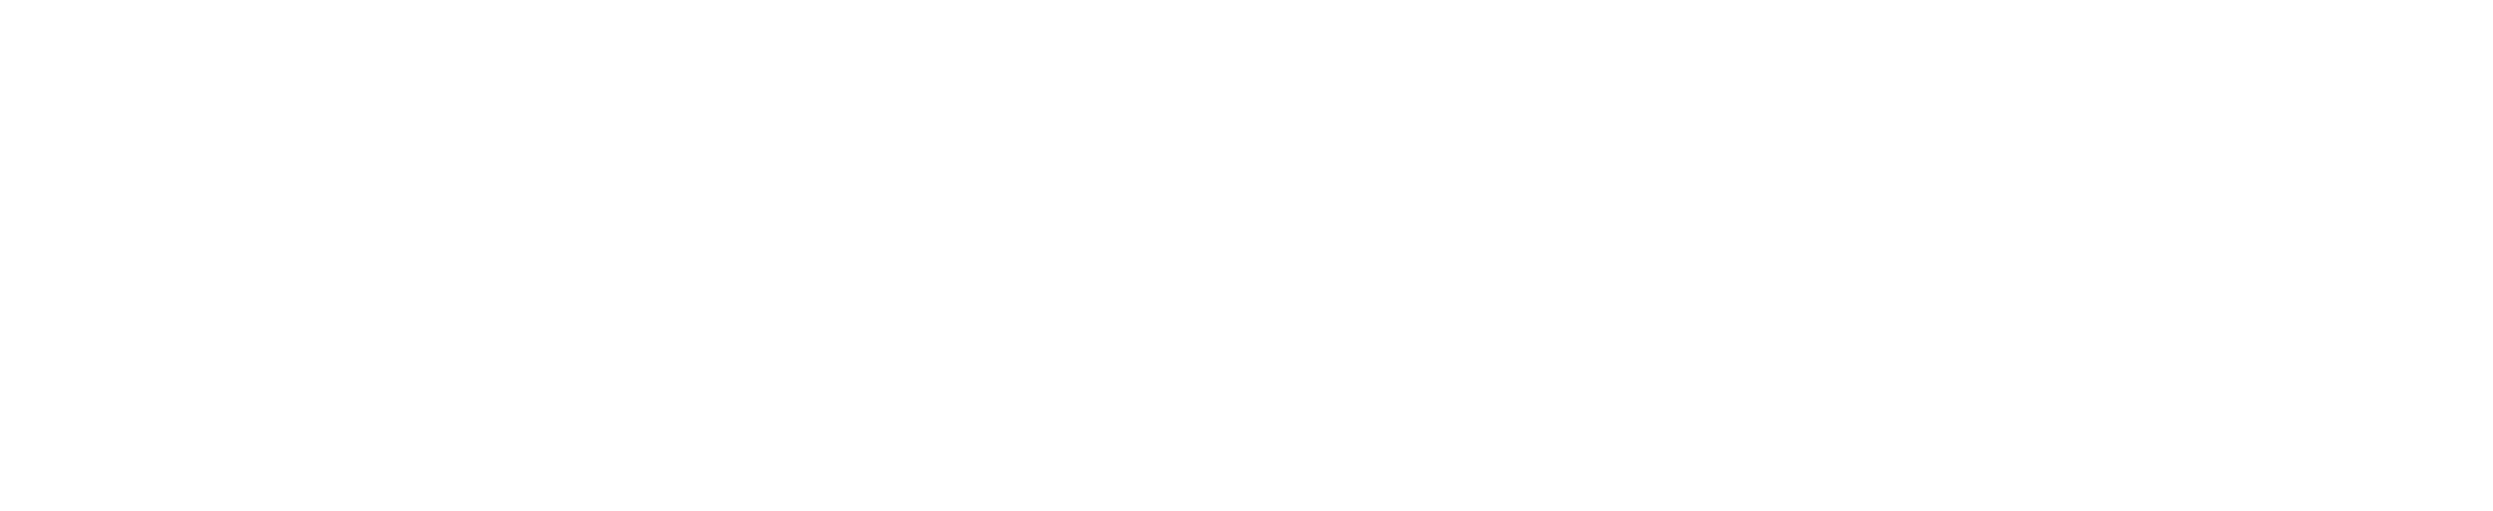  Port Network Authority of the Eastern Adriatic Sea - Port of Trieste and Monfalcone